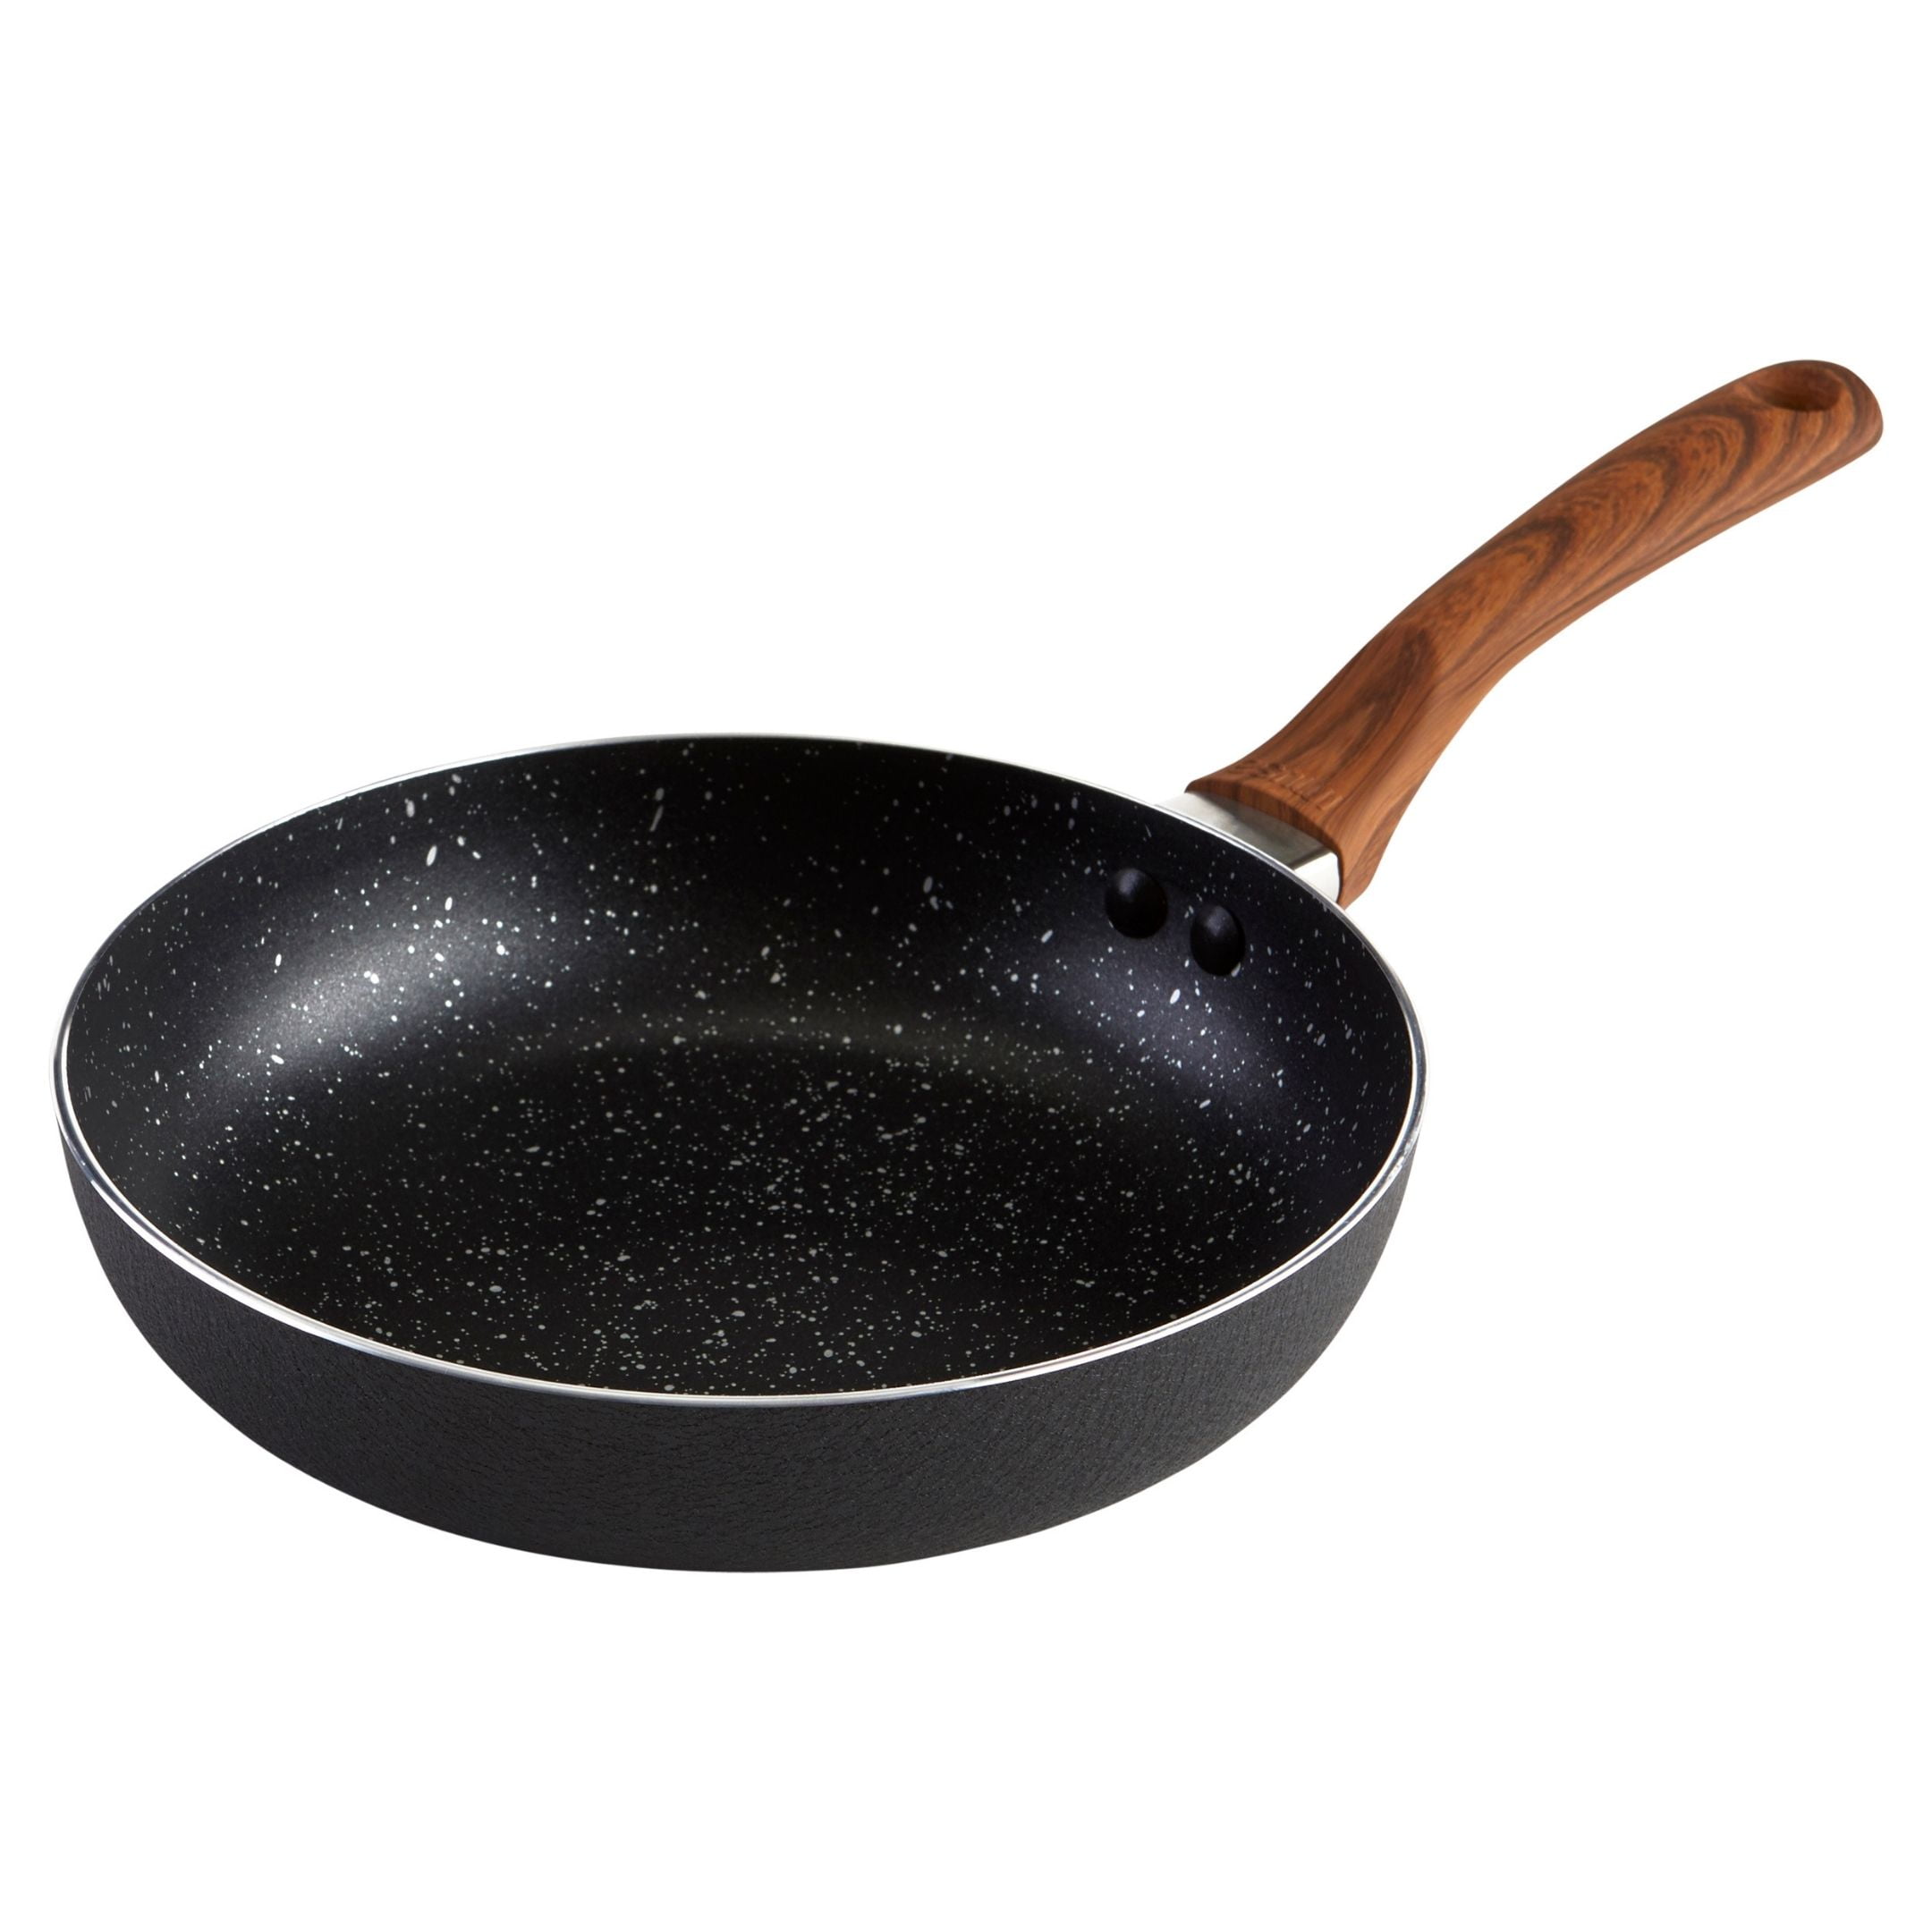  40cm black cast iron pig iron pan extra large non stick frying  pan frying pan gas induction cooker (size: 15.7 inches long x 1.6 inches  high): Home & Kitchen